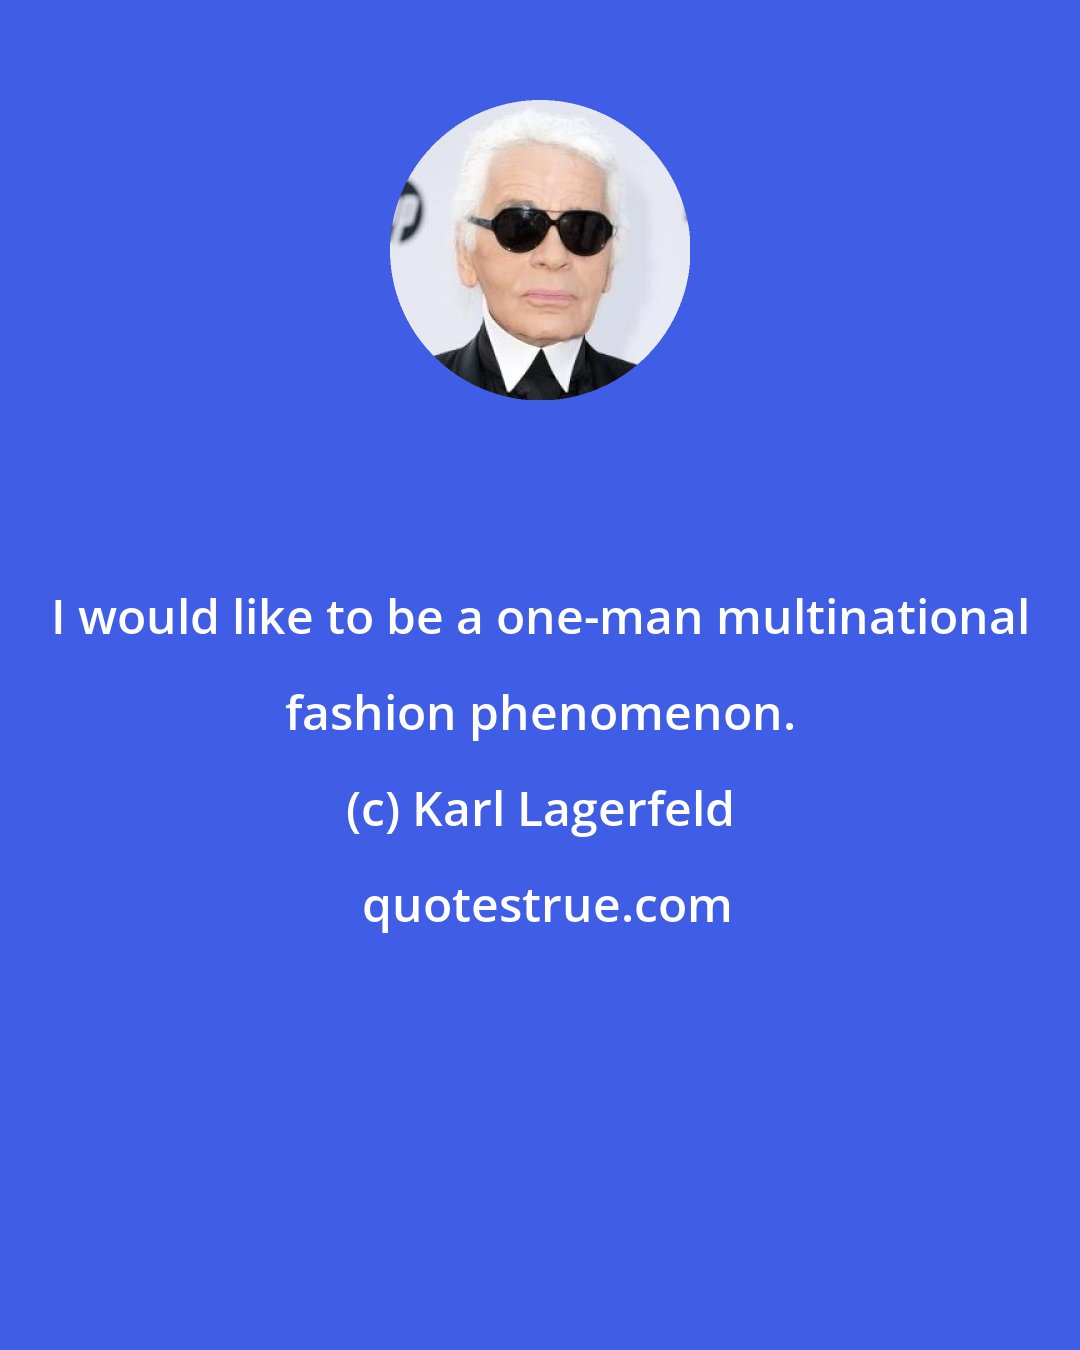 Karl Lagerfeld: I would like to be a one-man multinational fashion phenomenon.